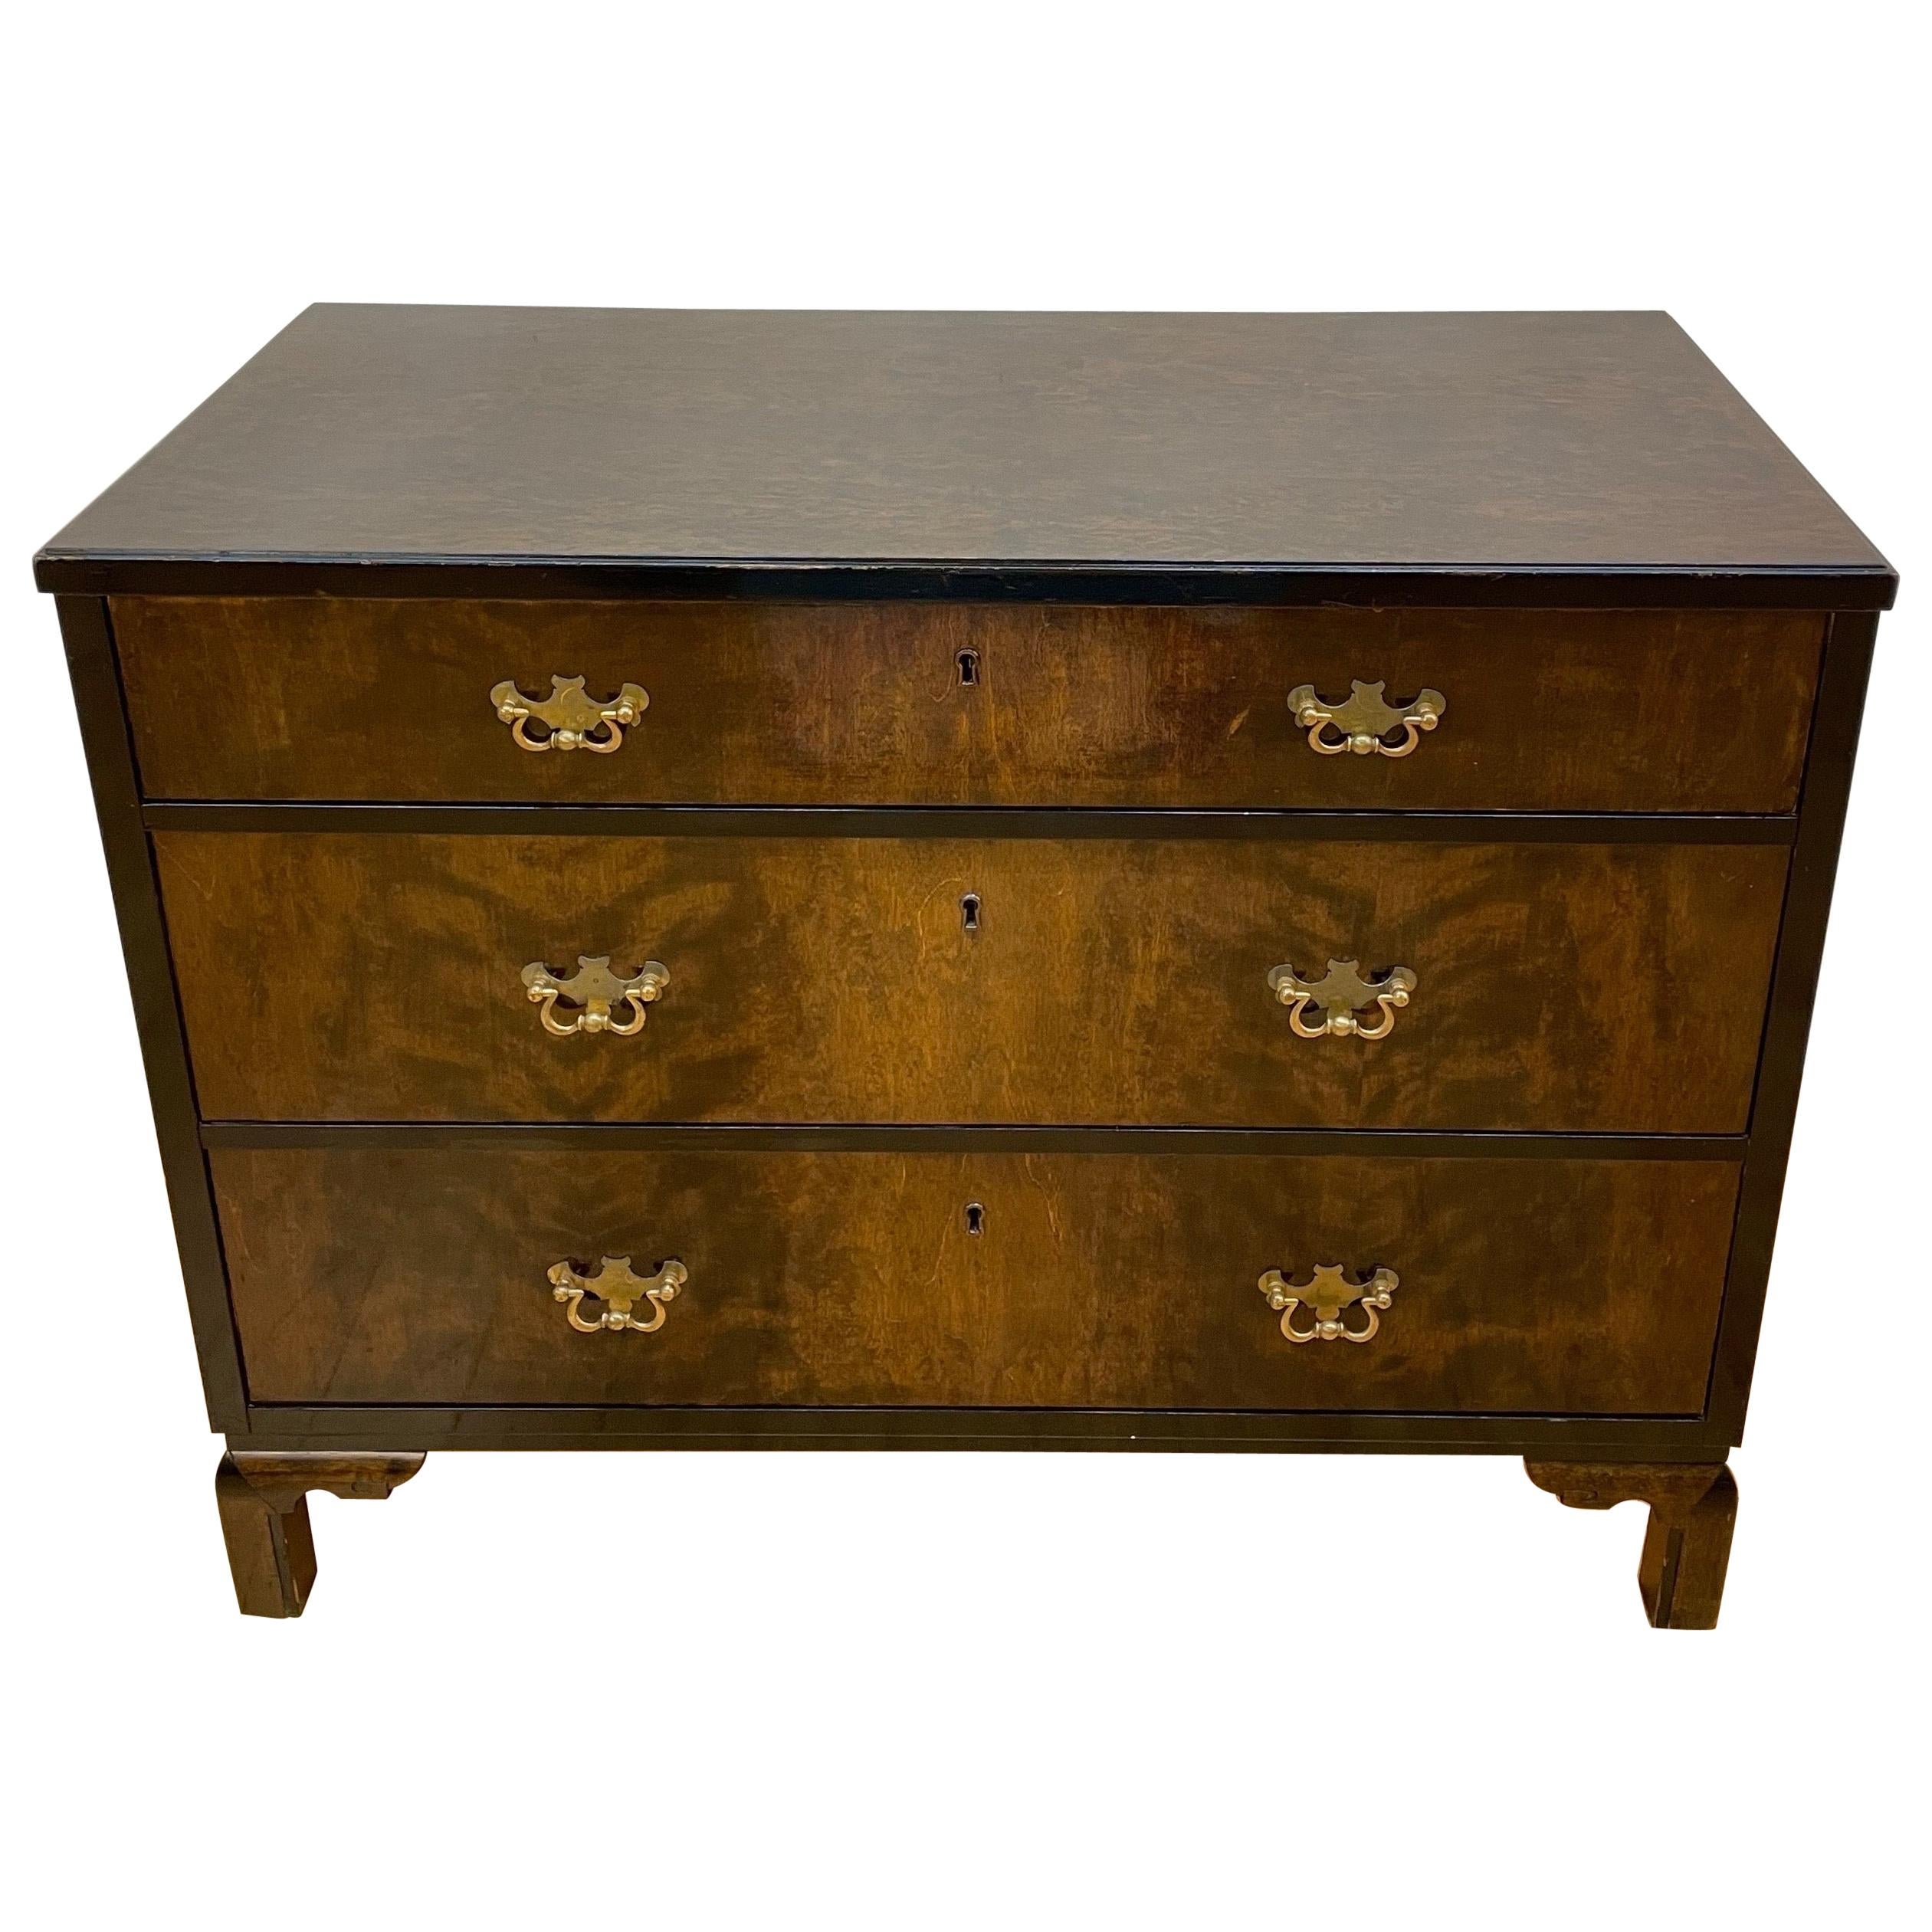 Neoclassical Revival Chest of Drawers For Sale